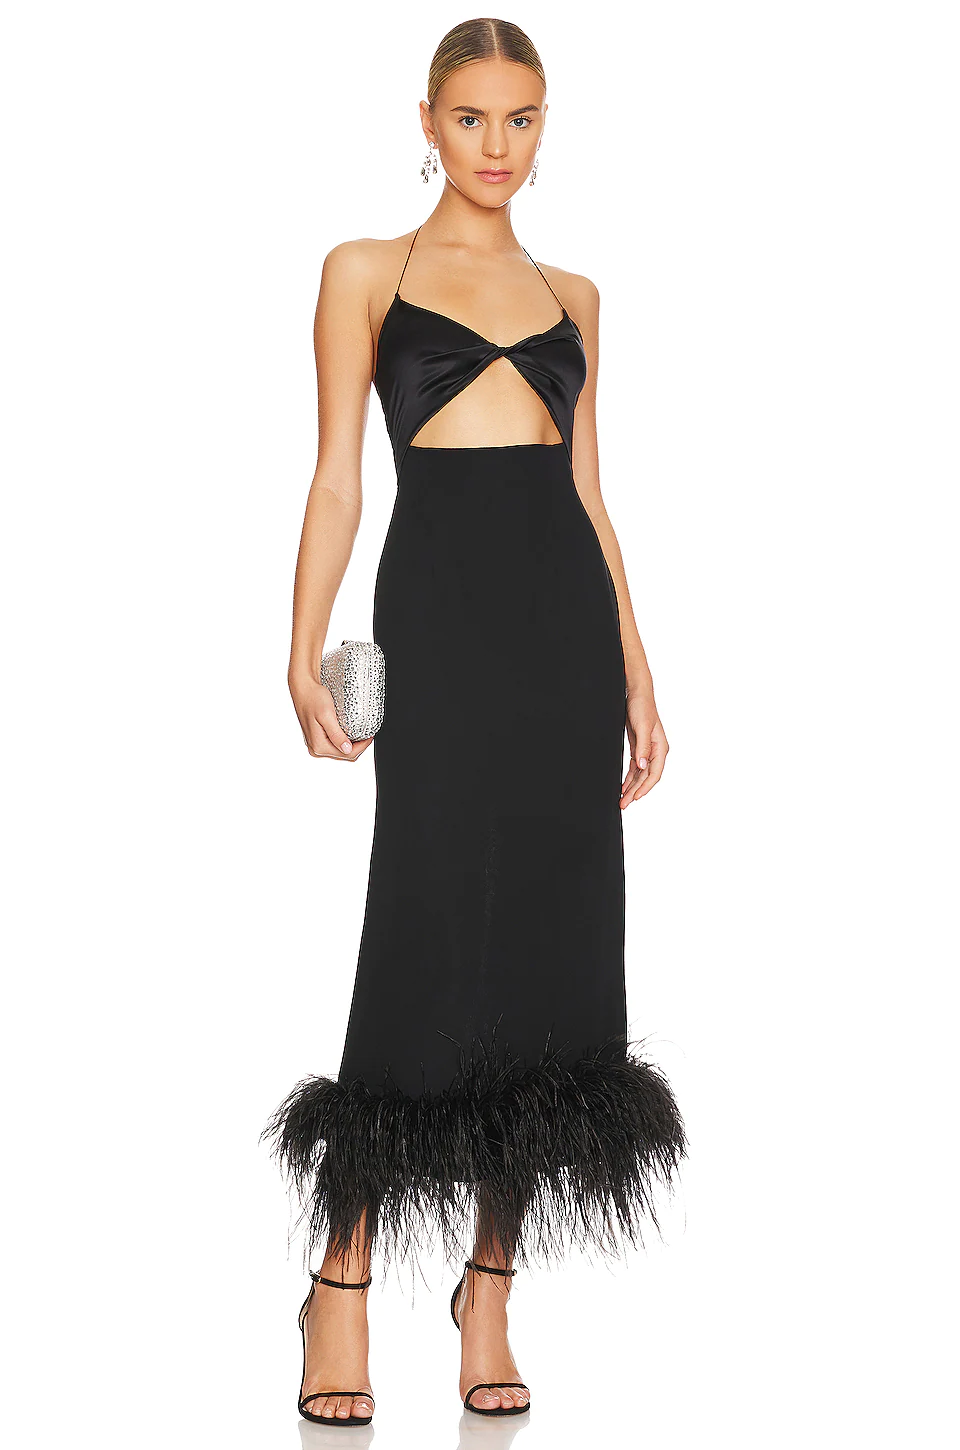 black LBD for engagement party with feathers